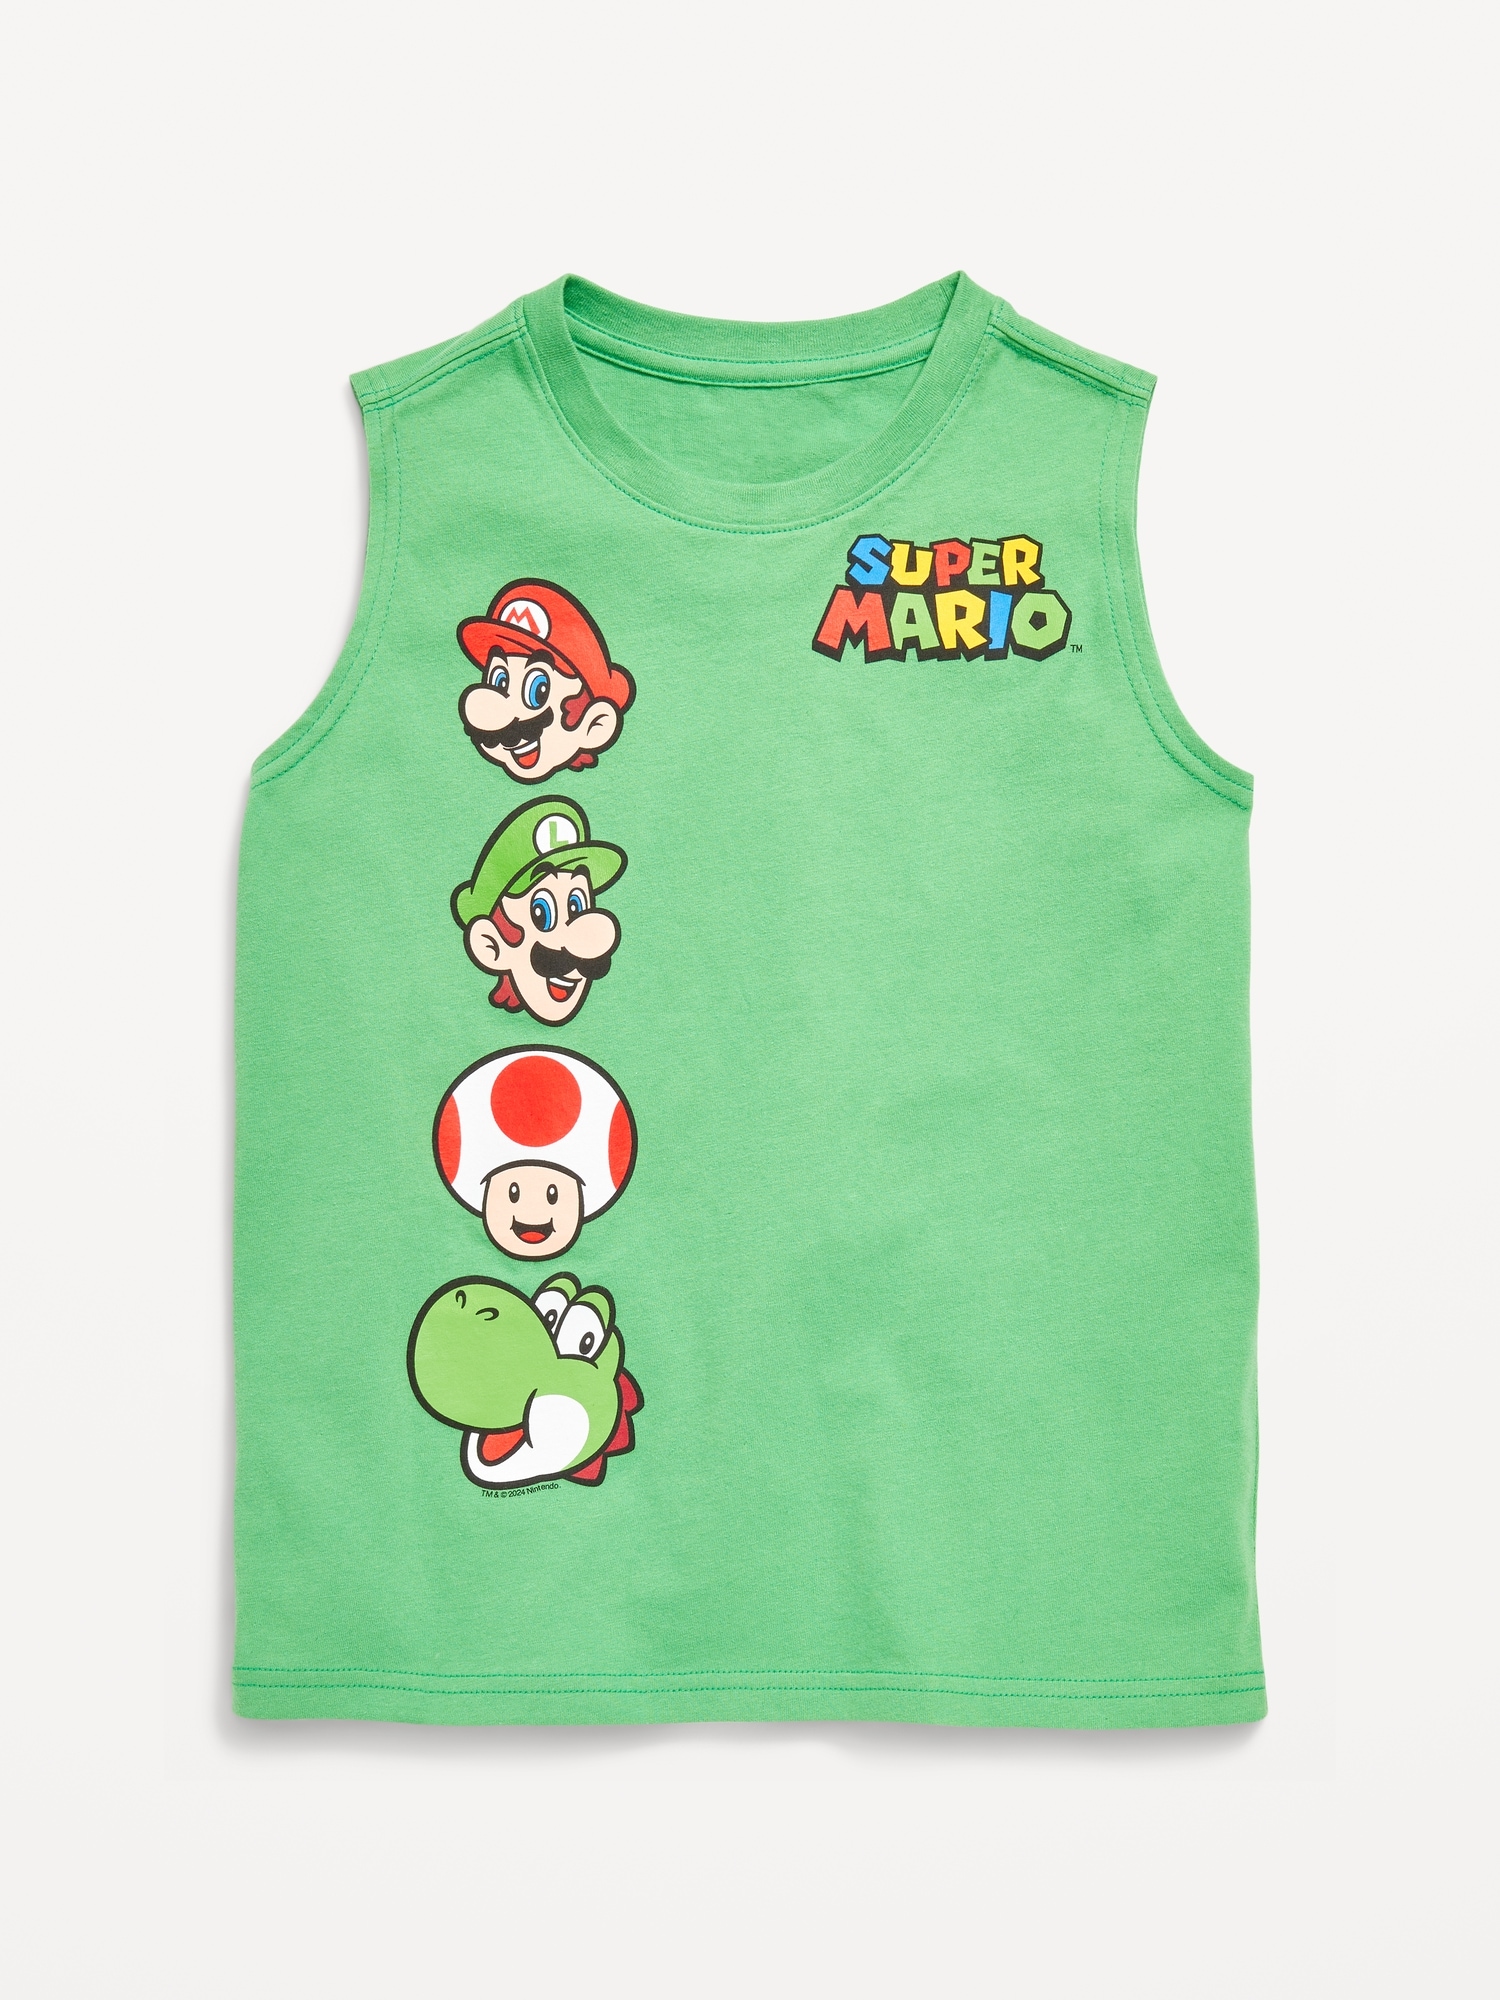 Super Mario™ Gender-Neutral Graphic Tank Top for Kids